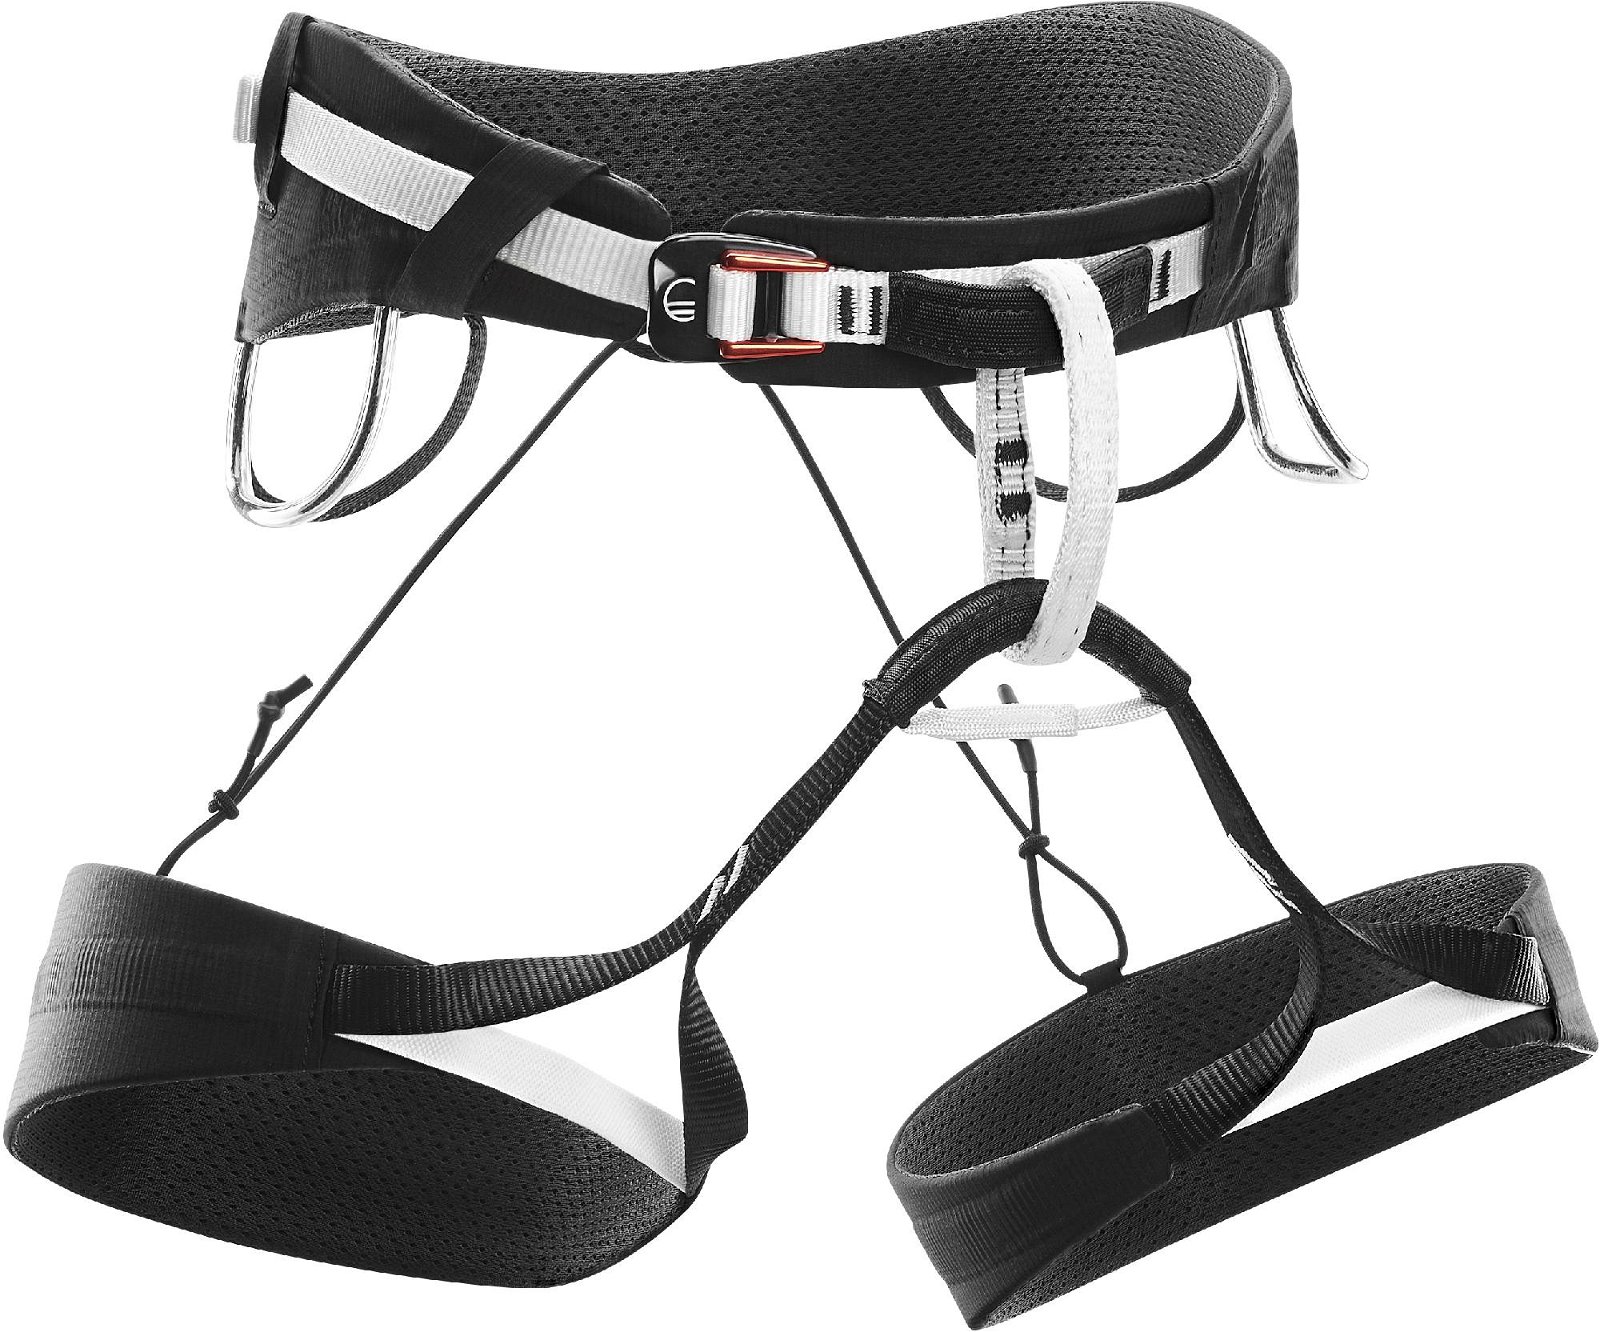 Wild Country Mosquito harness